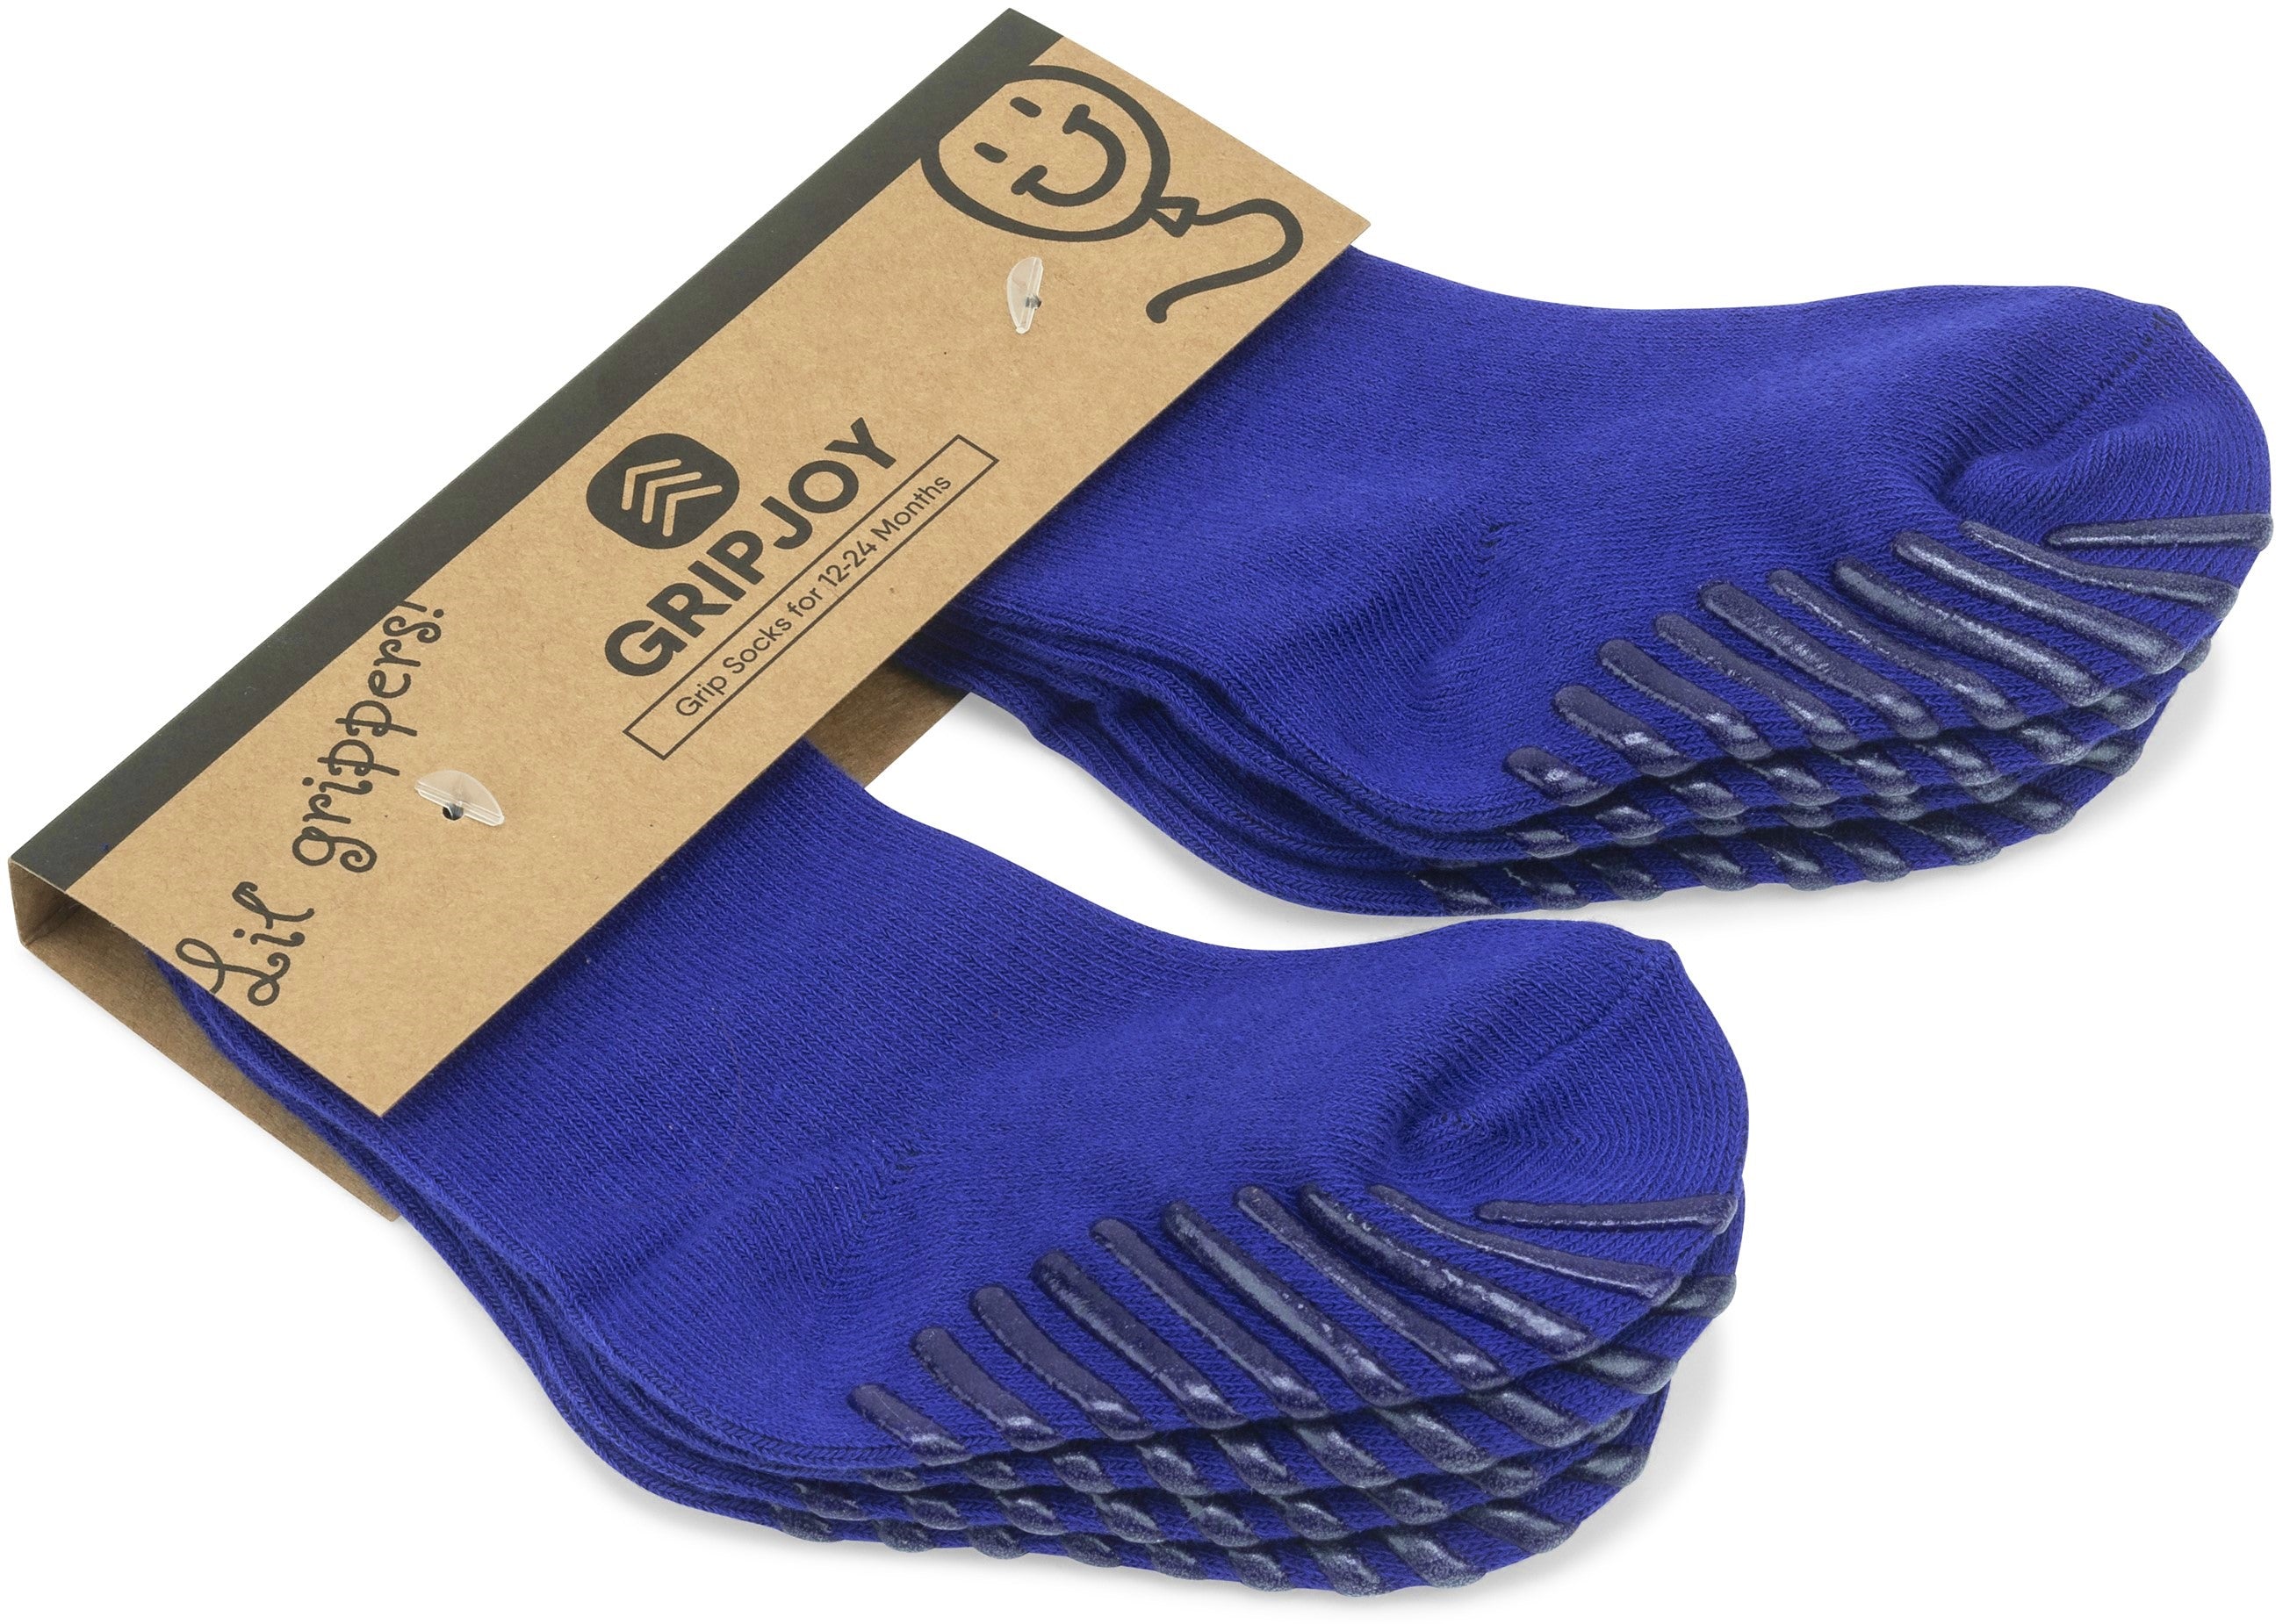 Fuzzy Socks with Grips for Men x4 Pairs - Gripjoy Socks